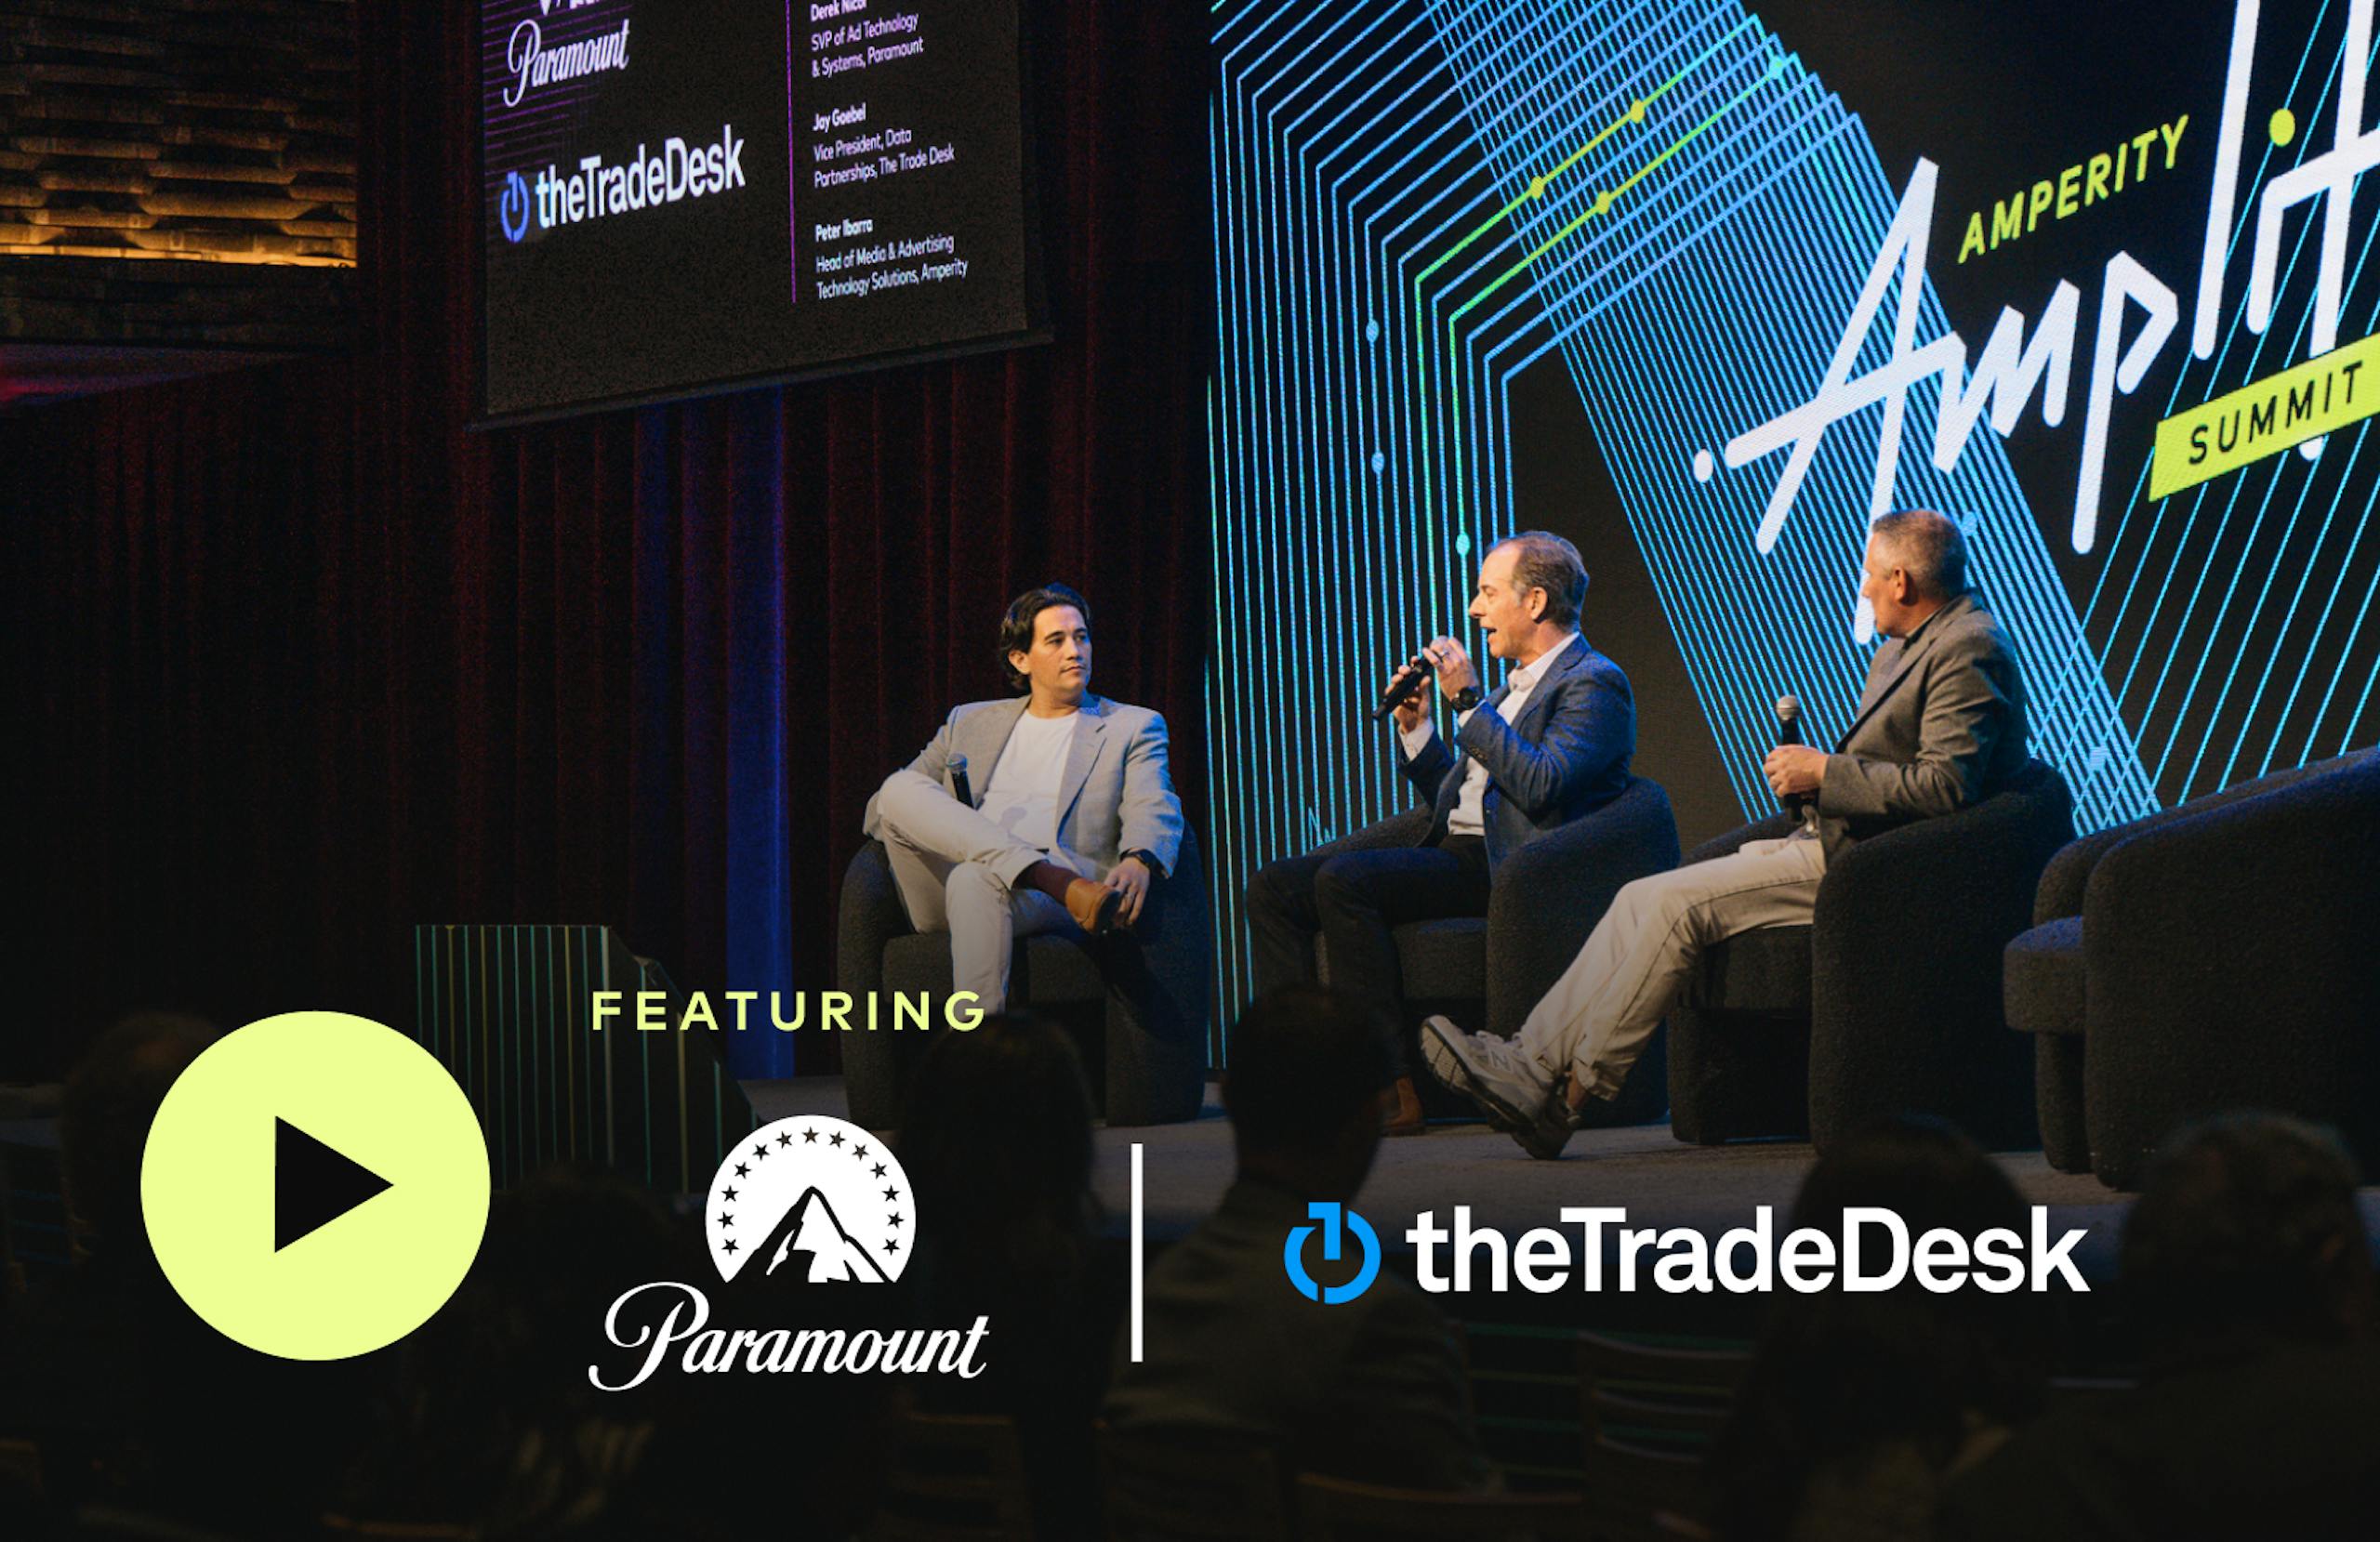 Three men sitting onstage at Amperity Amplify Summit. Featuring Paramount and the Trade Desk.